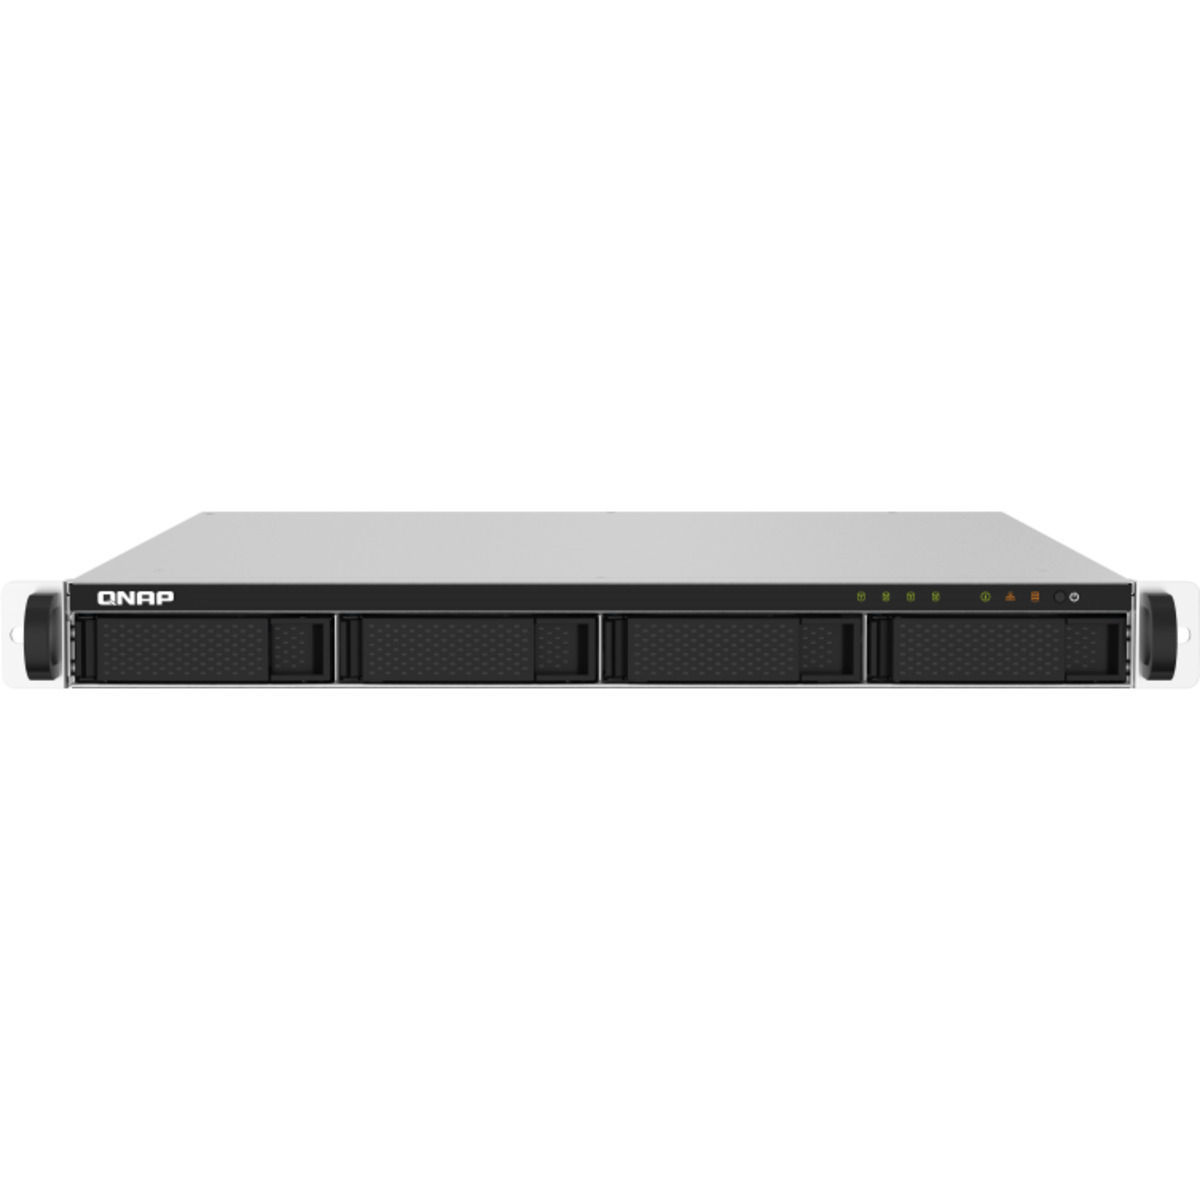 buy $2146 QNAP TS-432PXU-RP 32tb RackMount NAS - Network Attached Storage Device 4x8000gb Western Digital Ultrastar DC HC320 HUS728T8TALE6L4 3.5 7200rpm SATA 6Gb/s HDD ENTERPRISE Class Drives Installed - Burn-In Tested - FREE RAM UPGRADE - nas headquarters buy network attached storage server device das new raid-5 free shipping usa christmas new year holiday sale TS-432PXU-RP